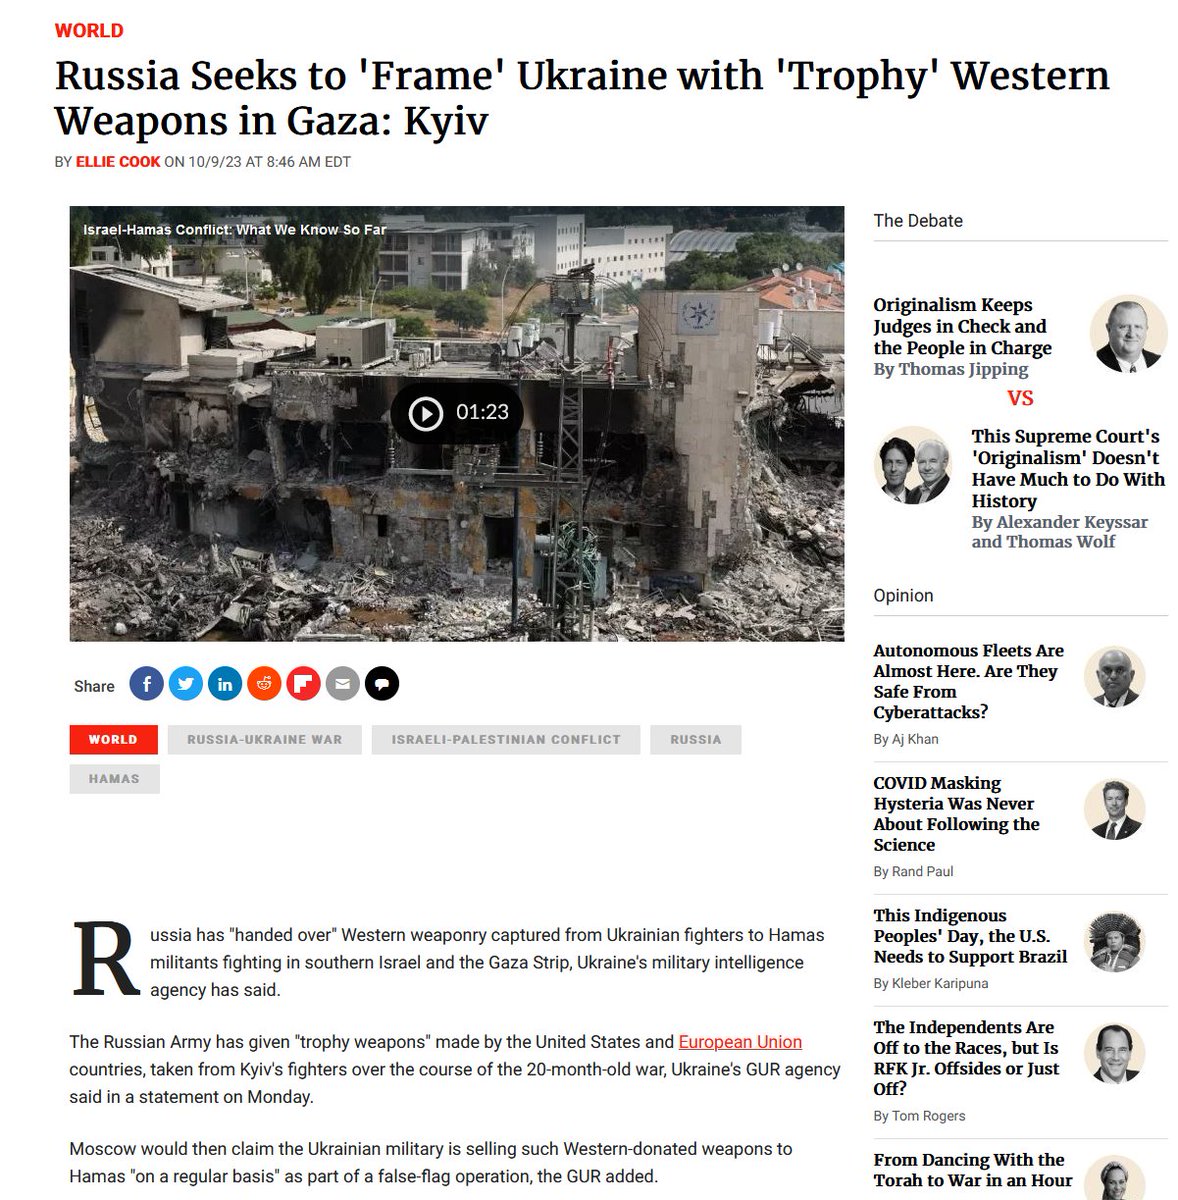 And as was predicted, Russia is trying to frame Ukraine for the Hamas terrorist attack by using 'trophy weapons' they've gotten from the Ukrainian troops. Why would Ukraine provide Hamas with weapons they so direly need in their war against genocidal Russia?